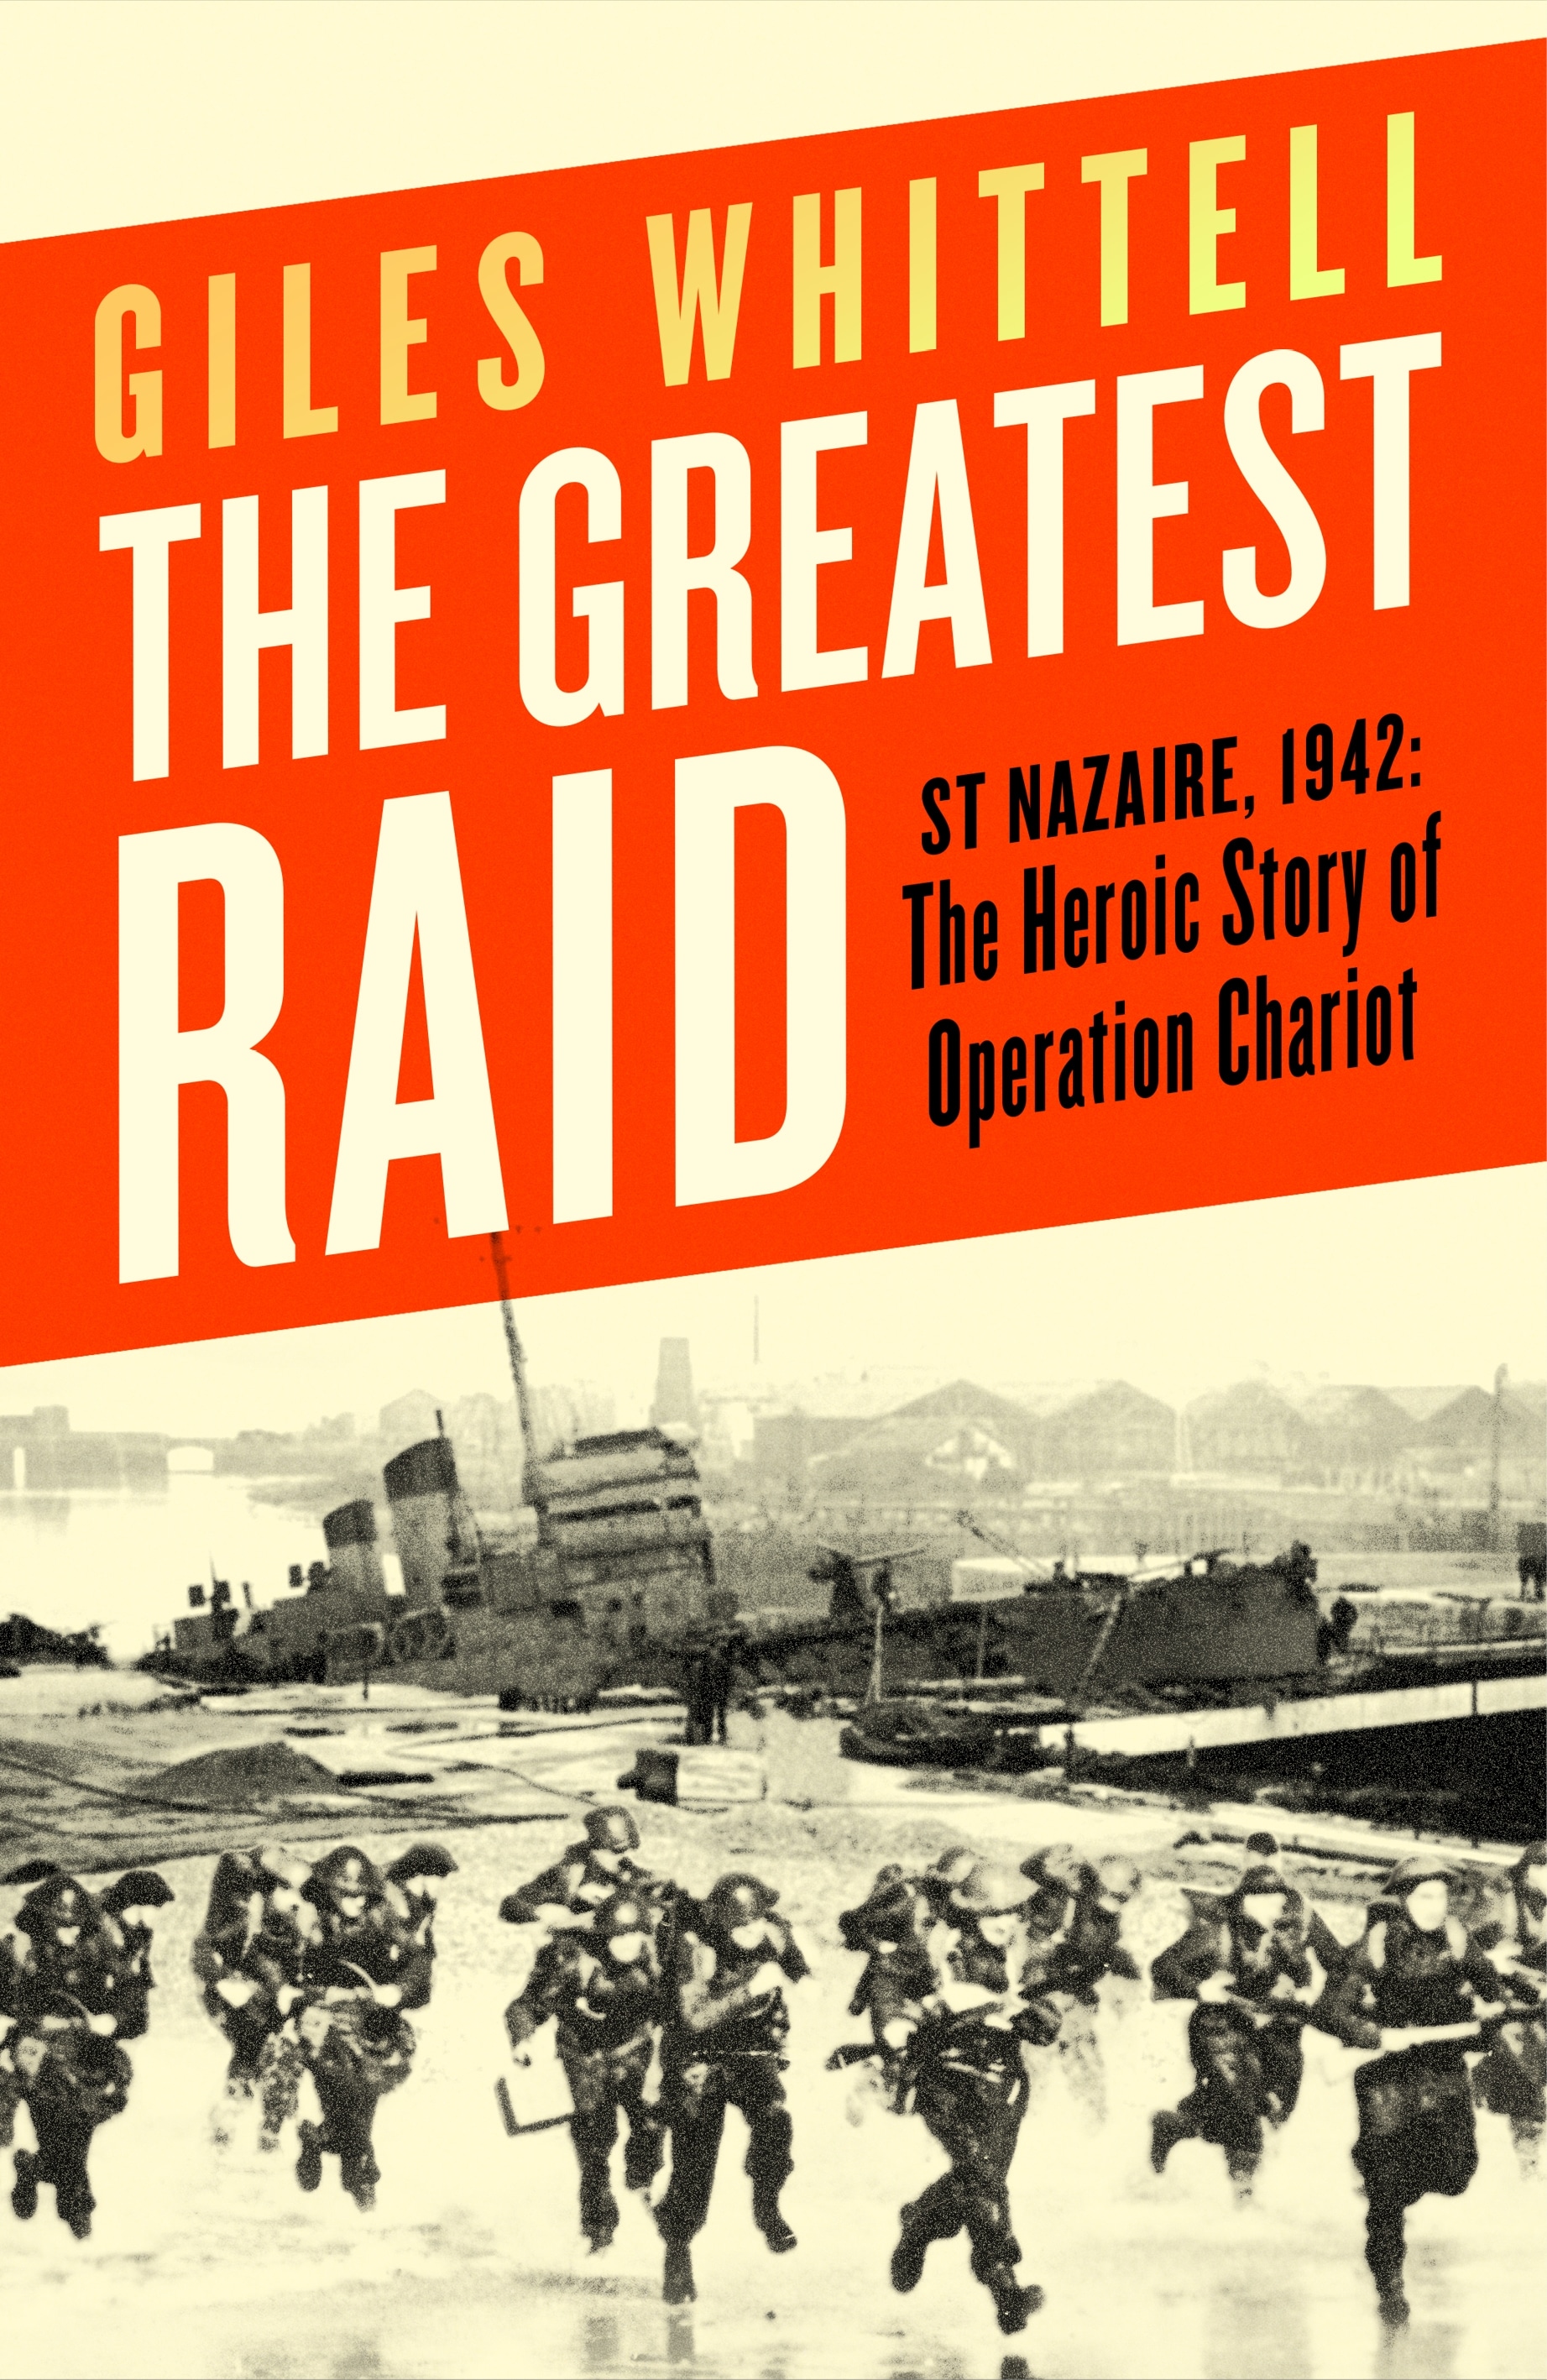 Book “The Greatest Raid” by Giles Whittell — March 17, 2022